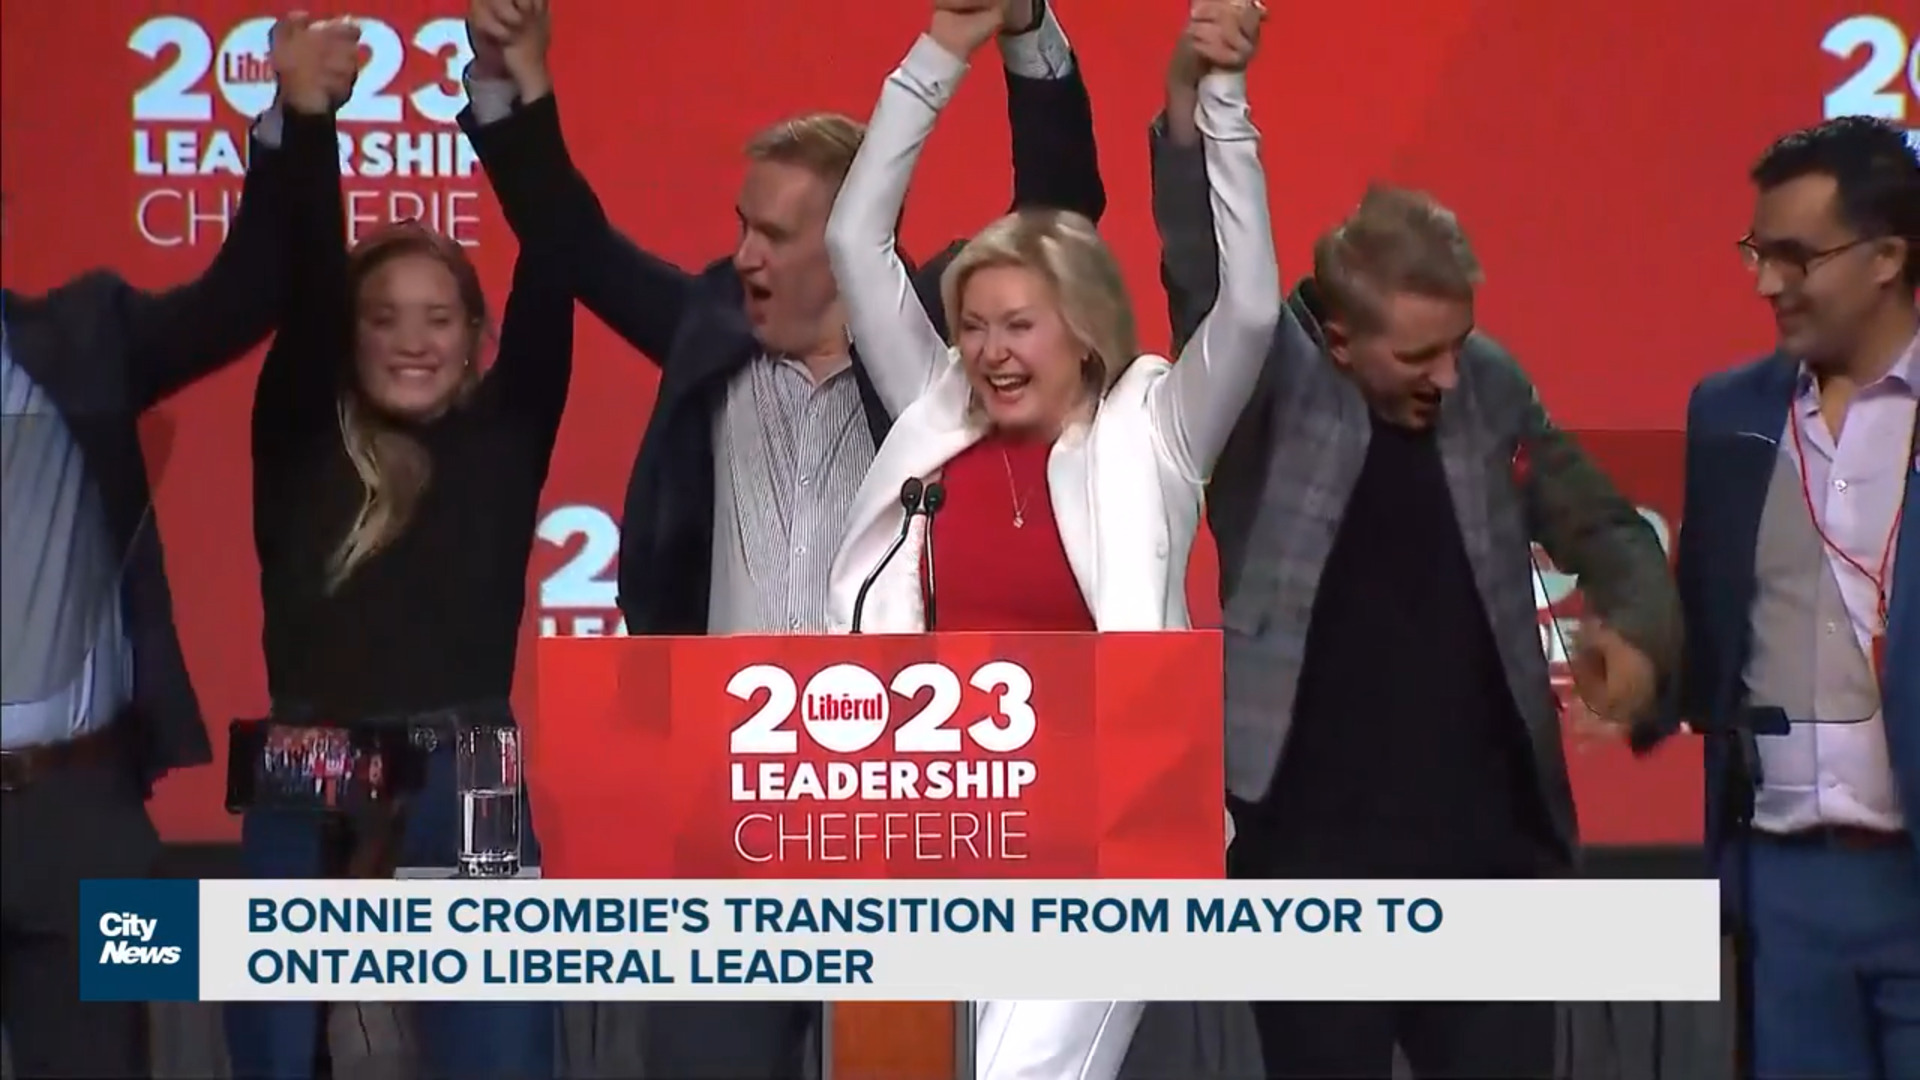 Bonnie Crombie's transition from mayor to Ontario Liberal leader 